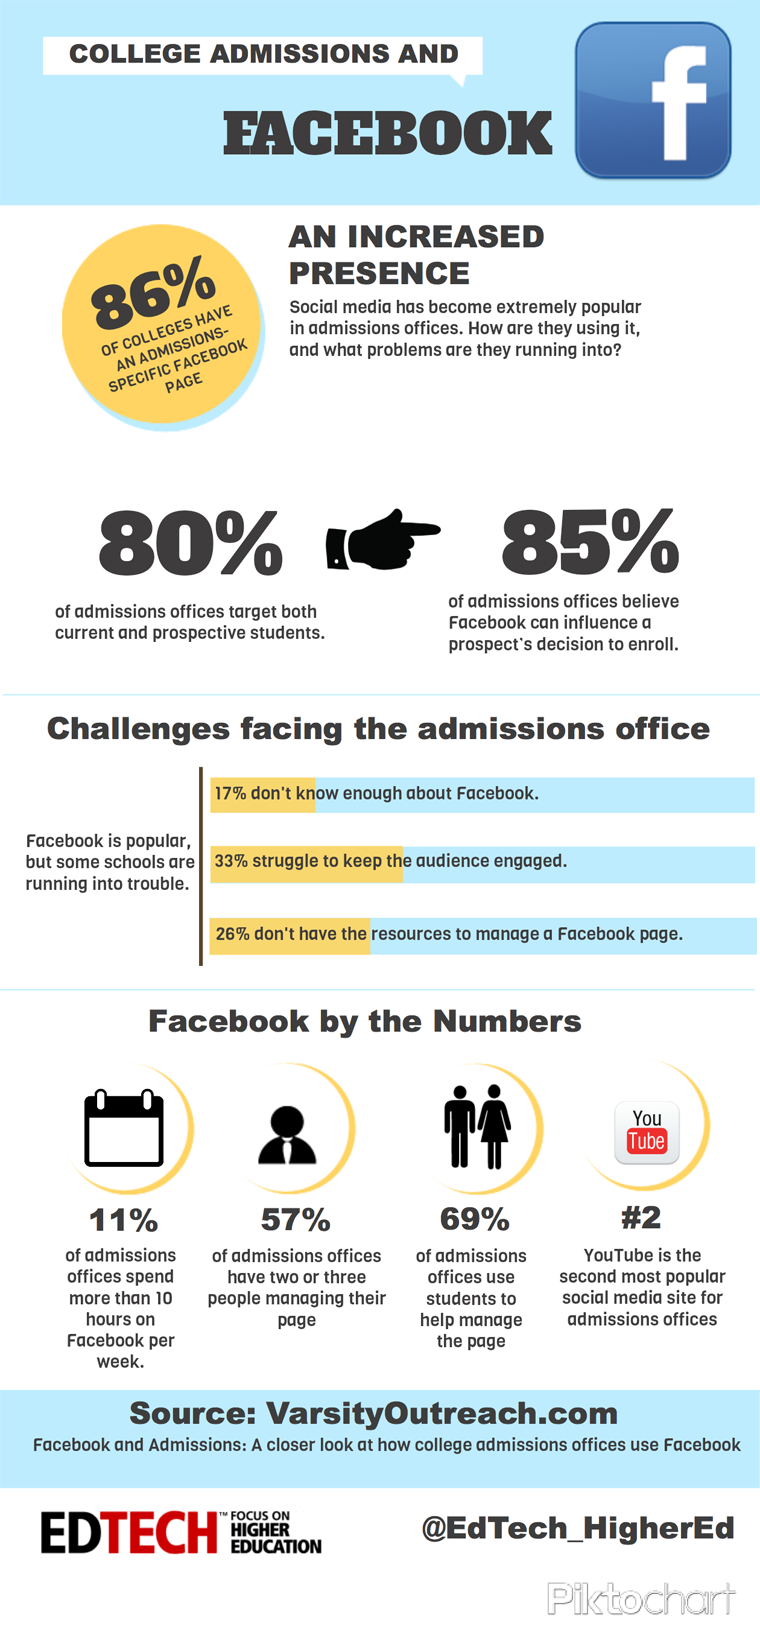 College Admissions Offices and Facebook